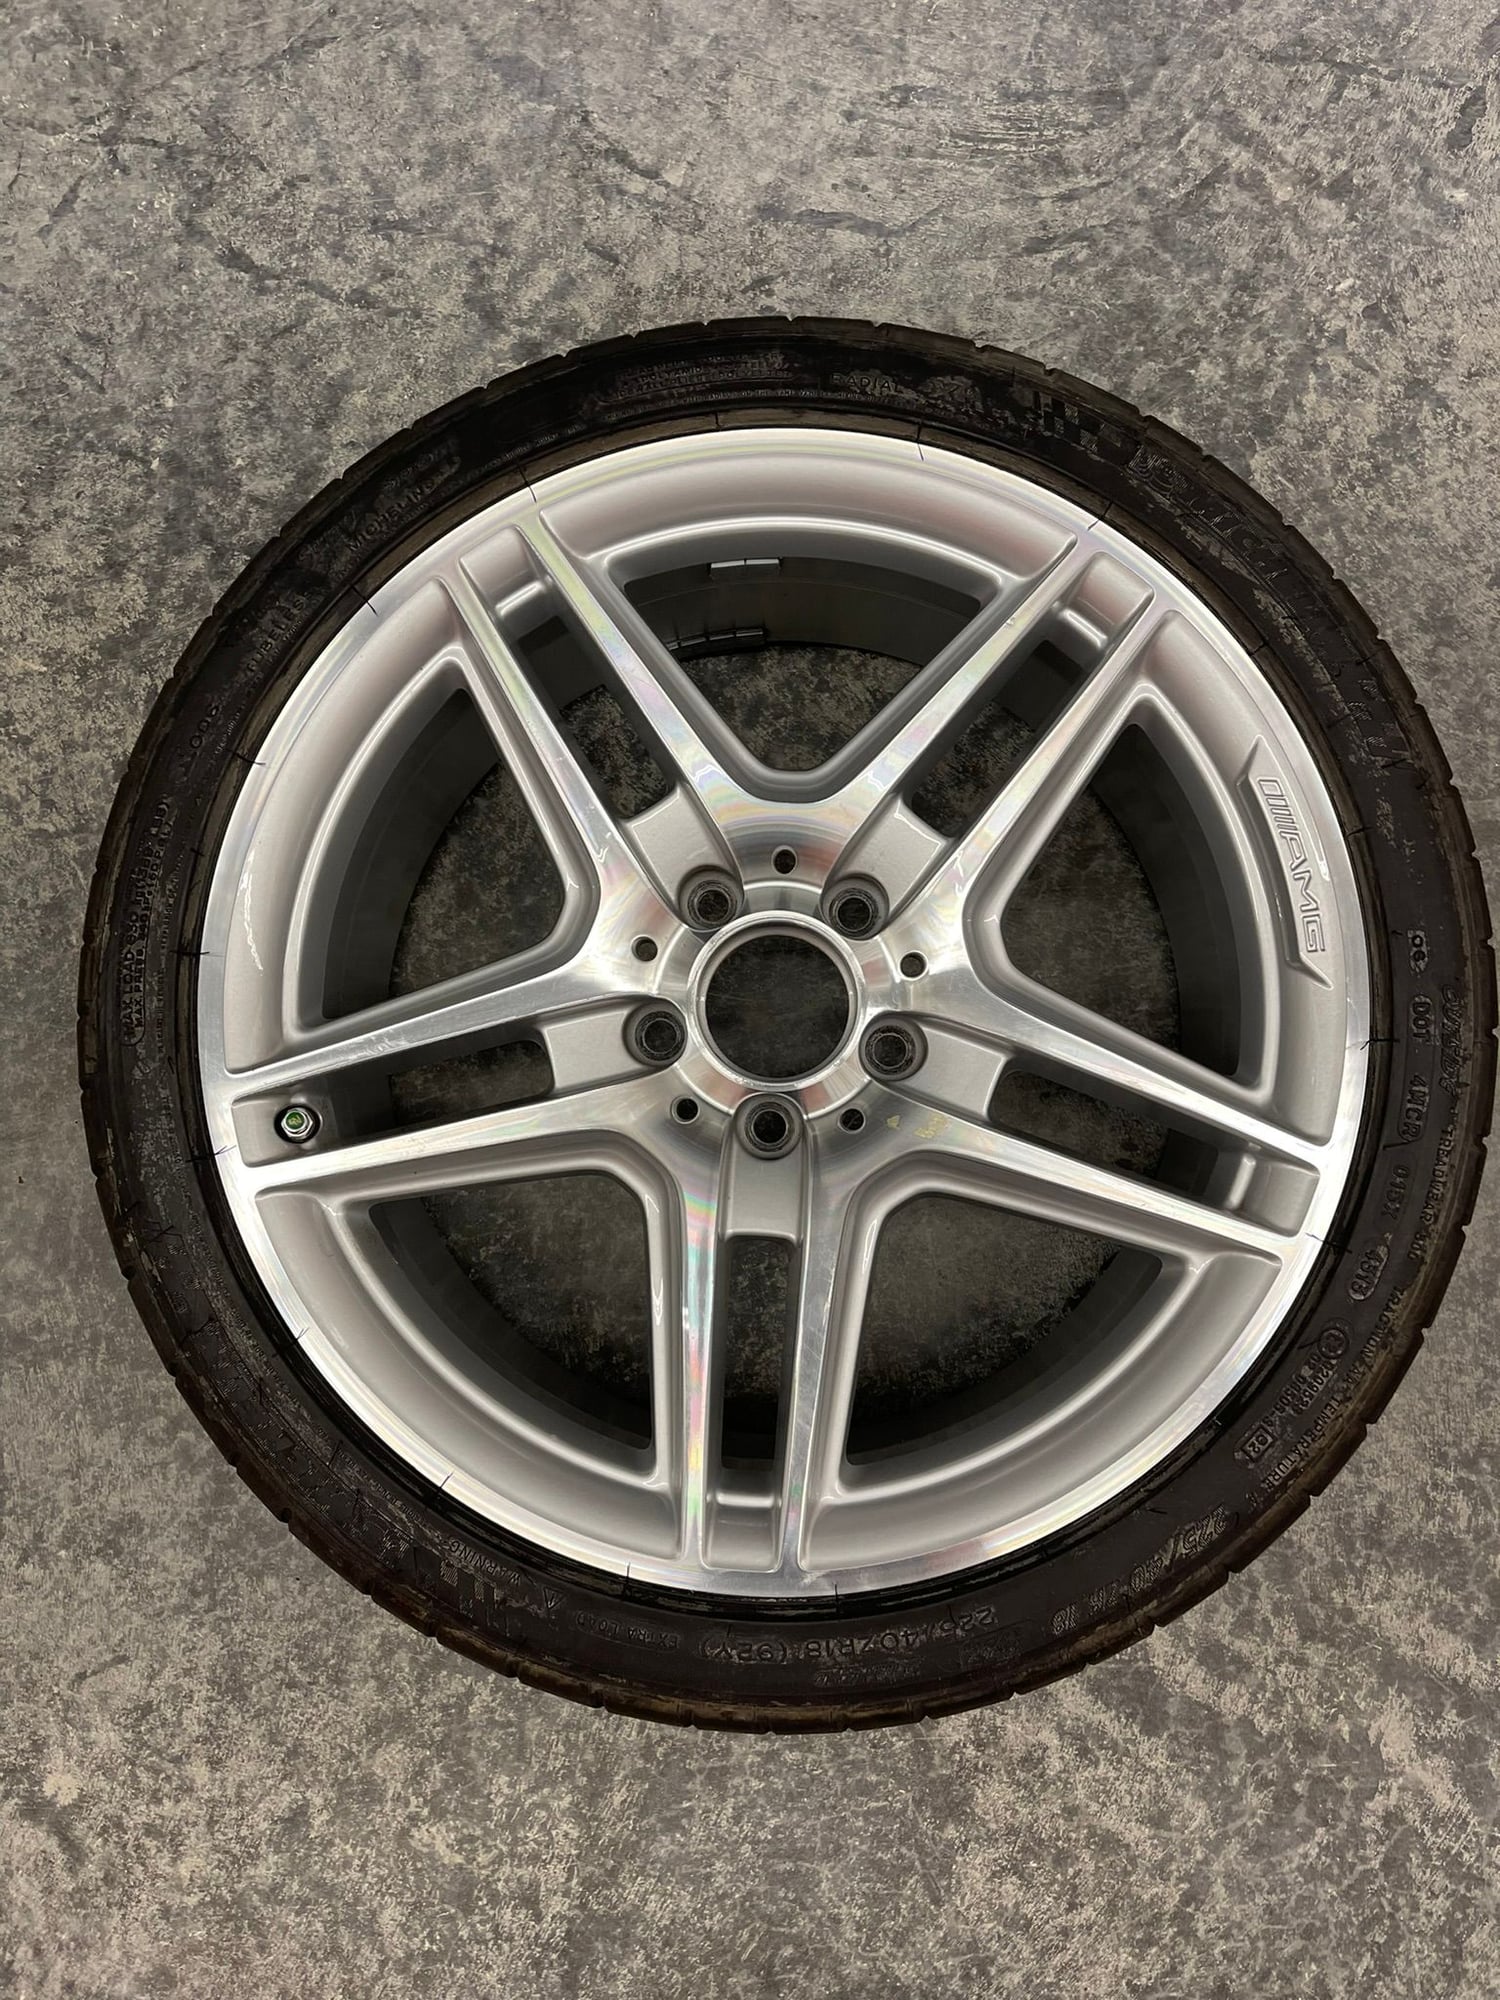 Wheels and Tires/Axles - W204: 18" AMG Staggered Wheel Set (4x Wheels) - Used - 2008 to 2014 Mercedes-Benz C300 - 2008 to 2014 Mercedes-Benz C350 - 2008 to 2014 Mercedes-Benz C250 - Lincolnshire, IL 60069, United States